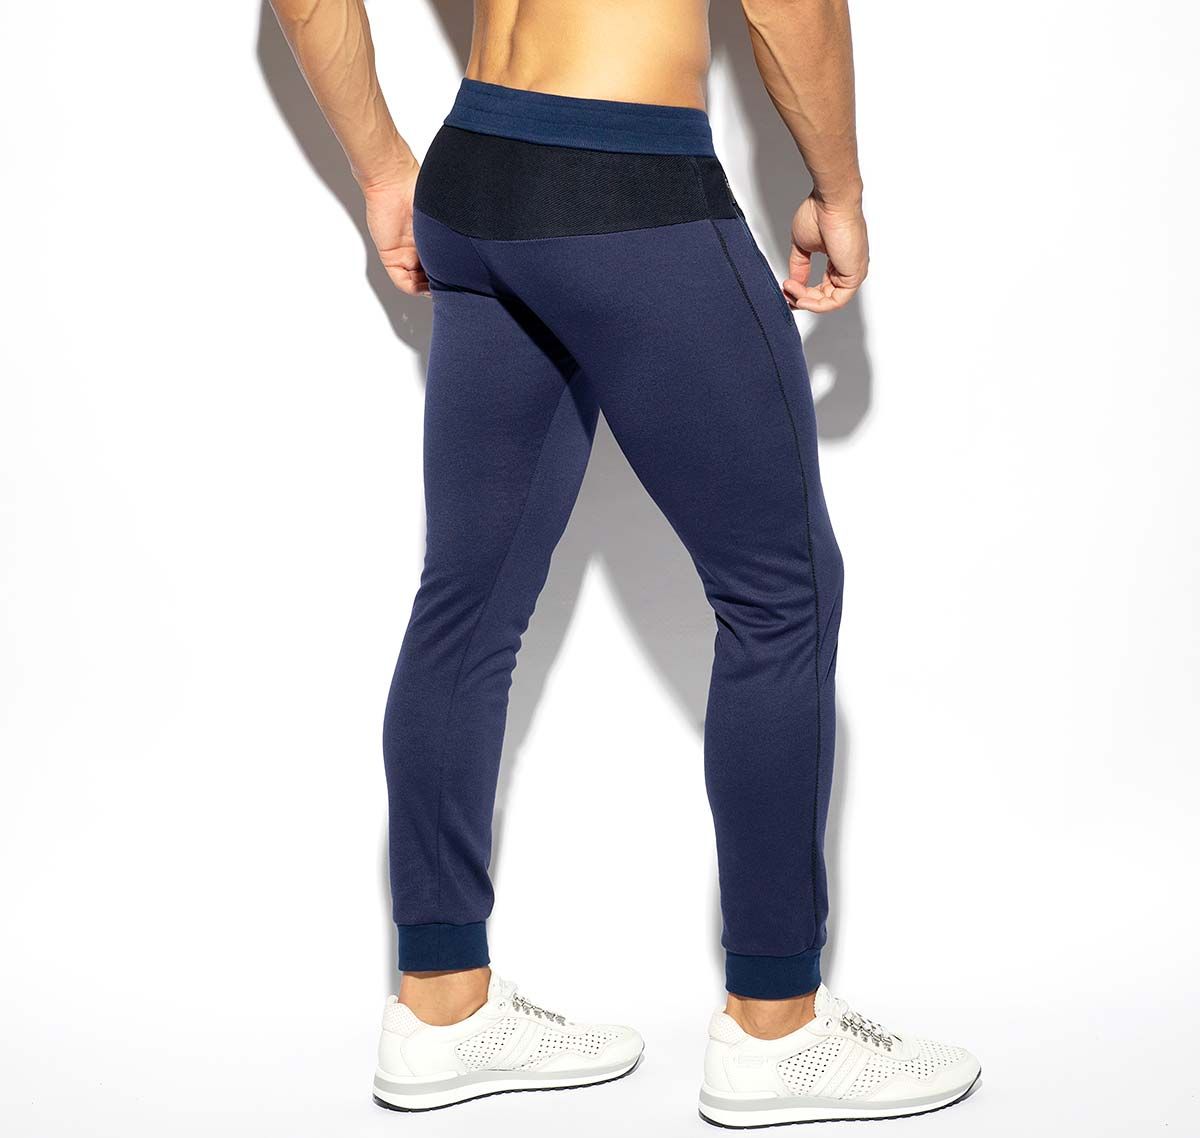 ES Collection training pants NAVY COMBI SPORTS PANTS SP277, navy